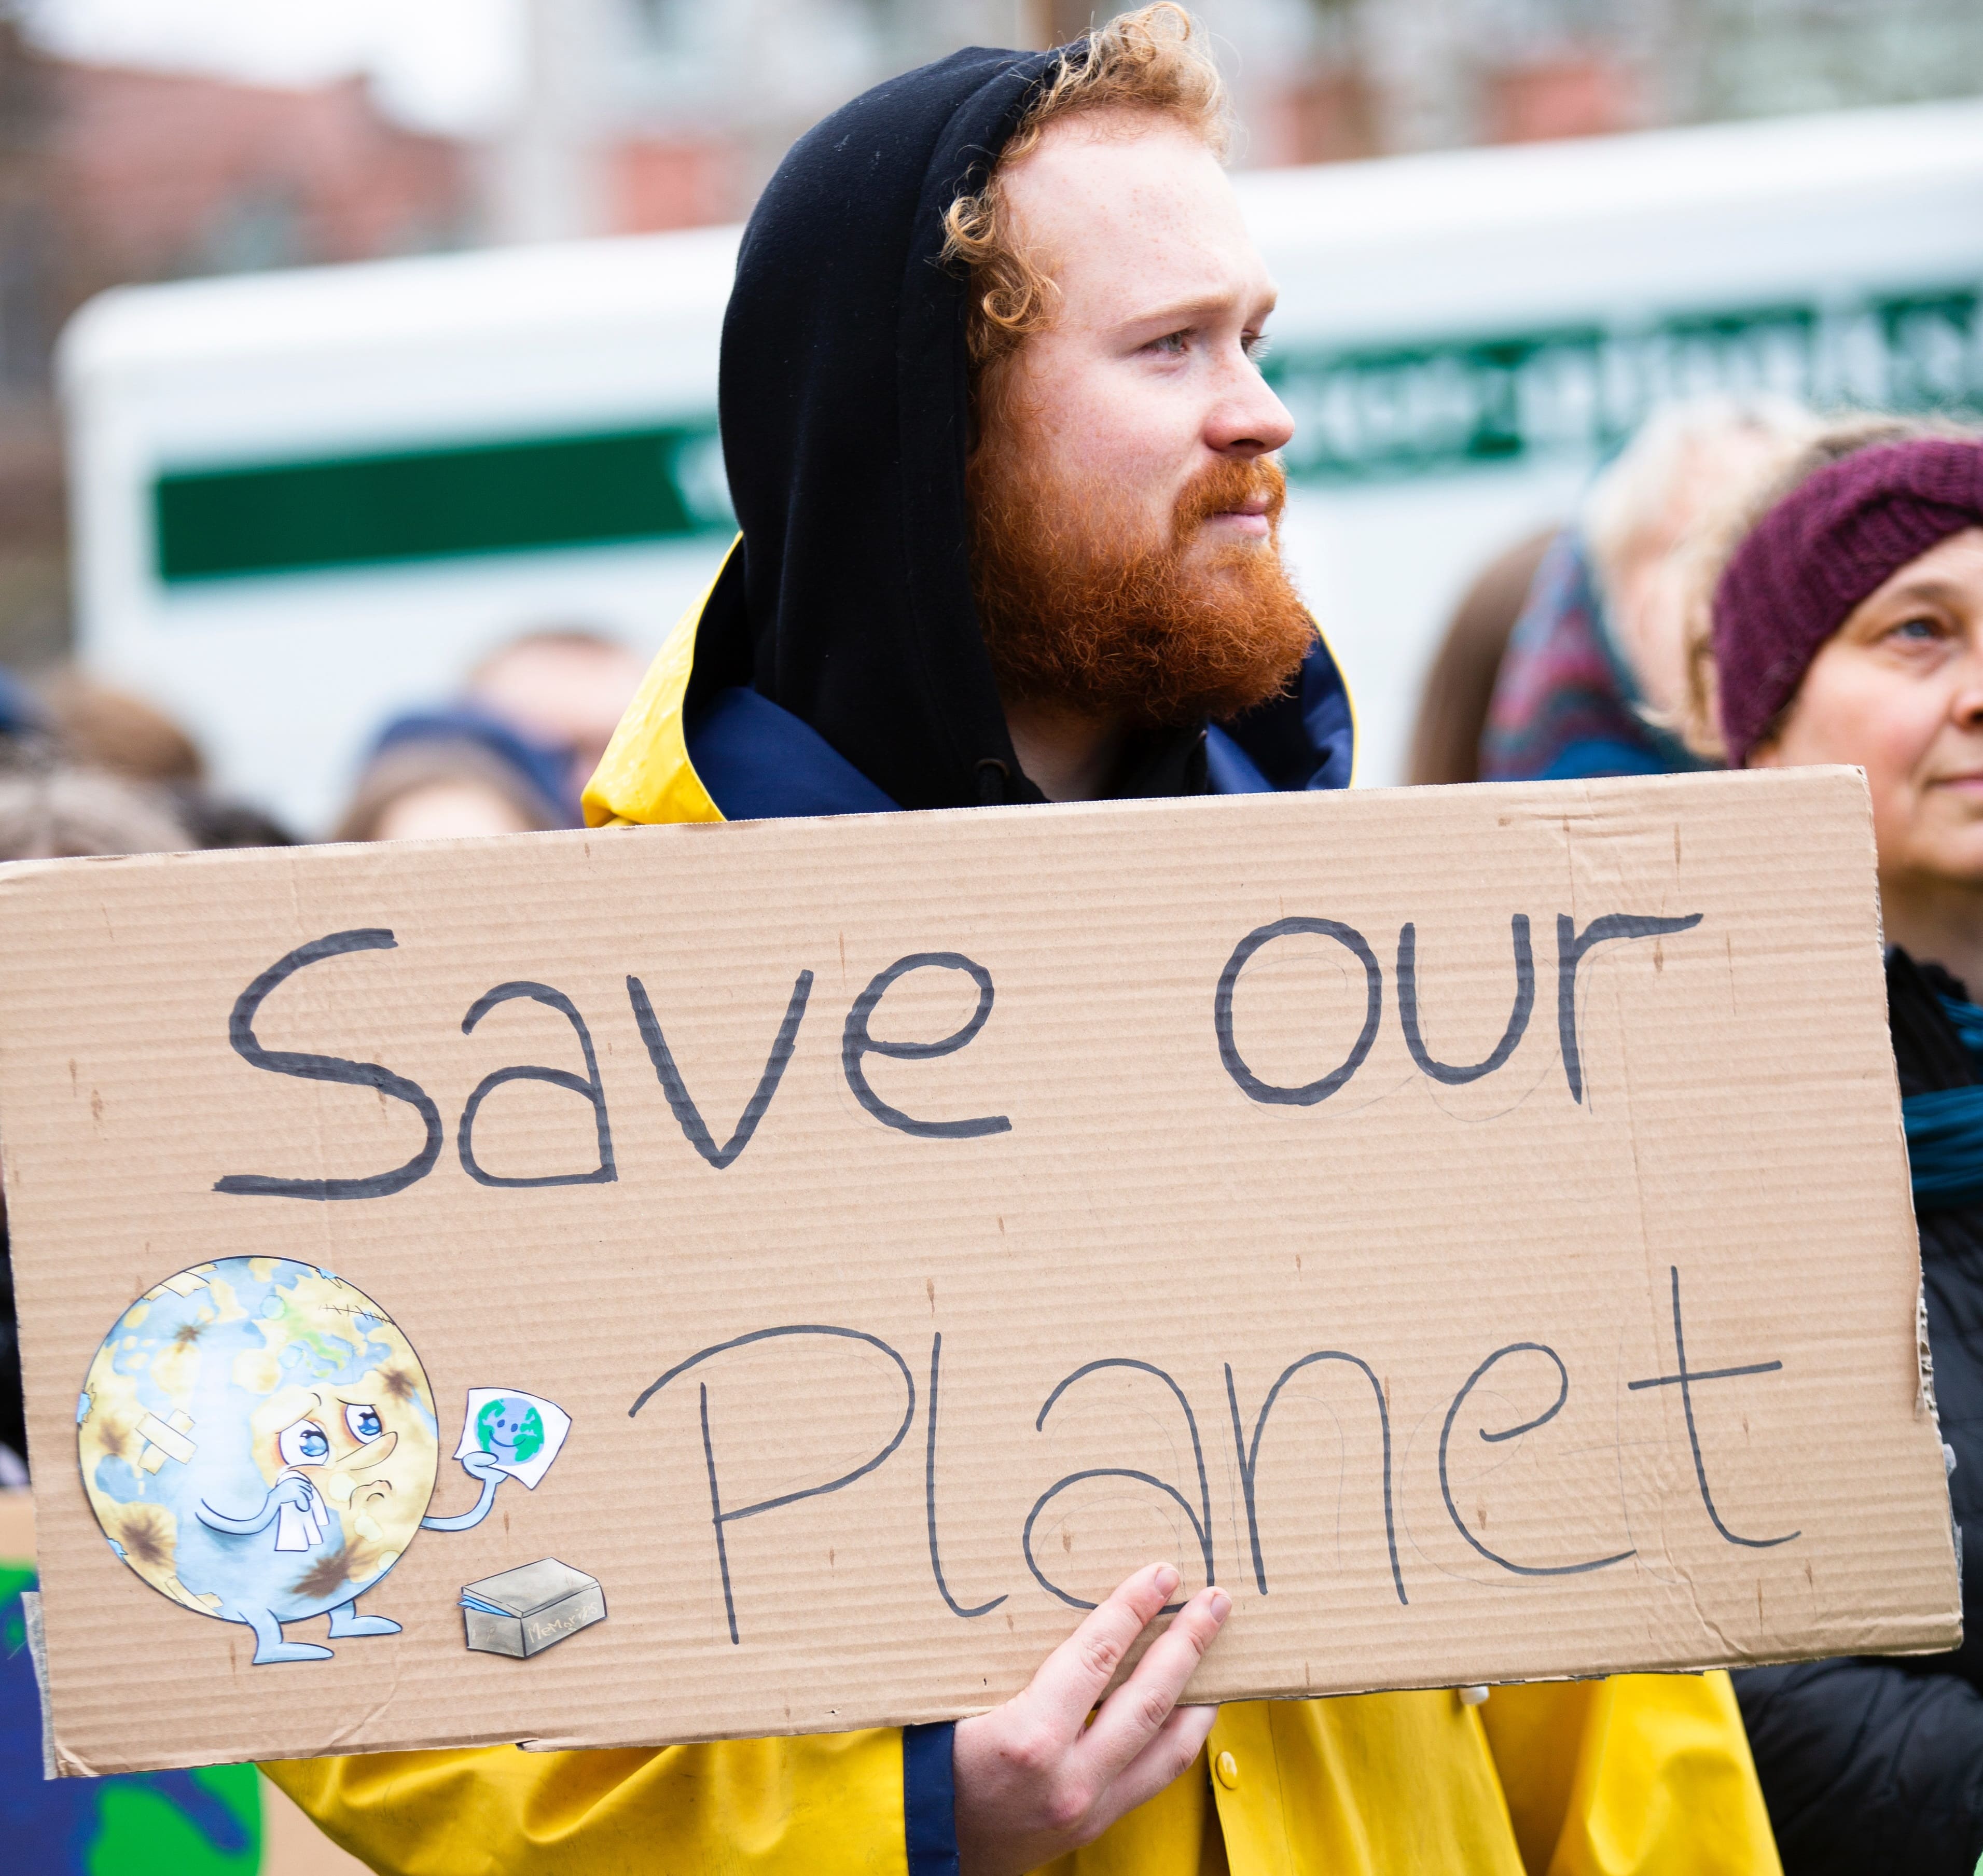 "Save our planet" sign at protest